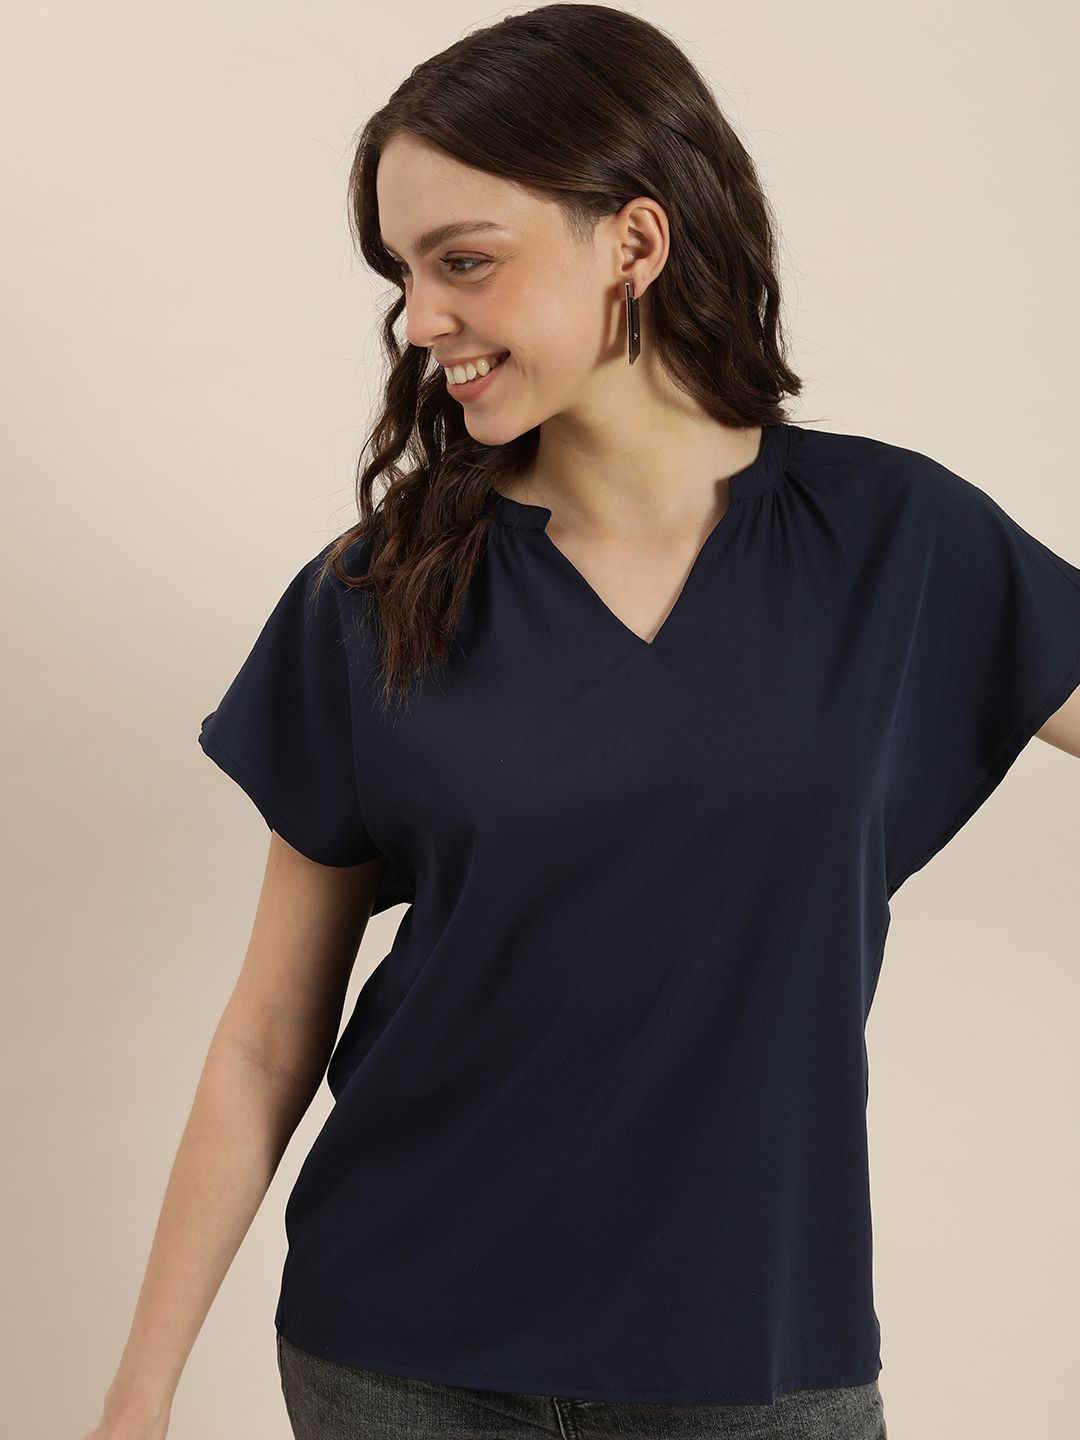 encore by INVICTUS Navy Blue Extended Sleeves Top Price in India